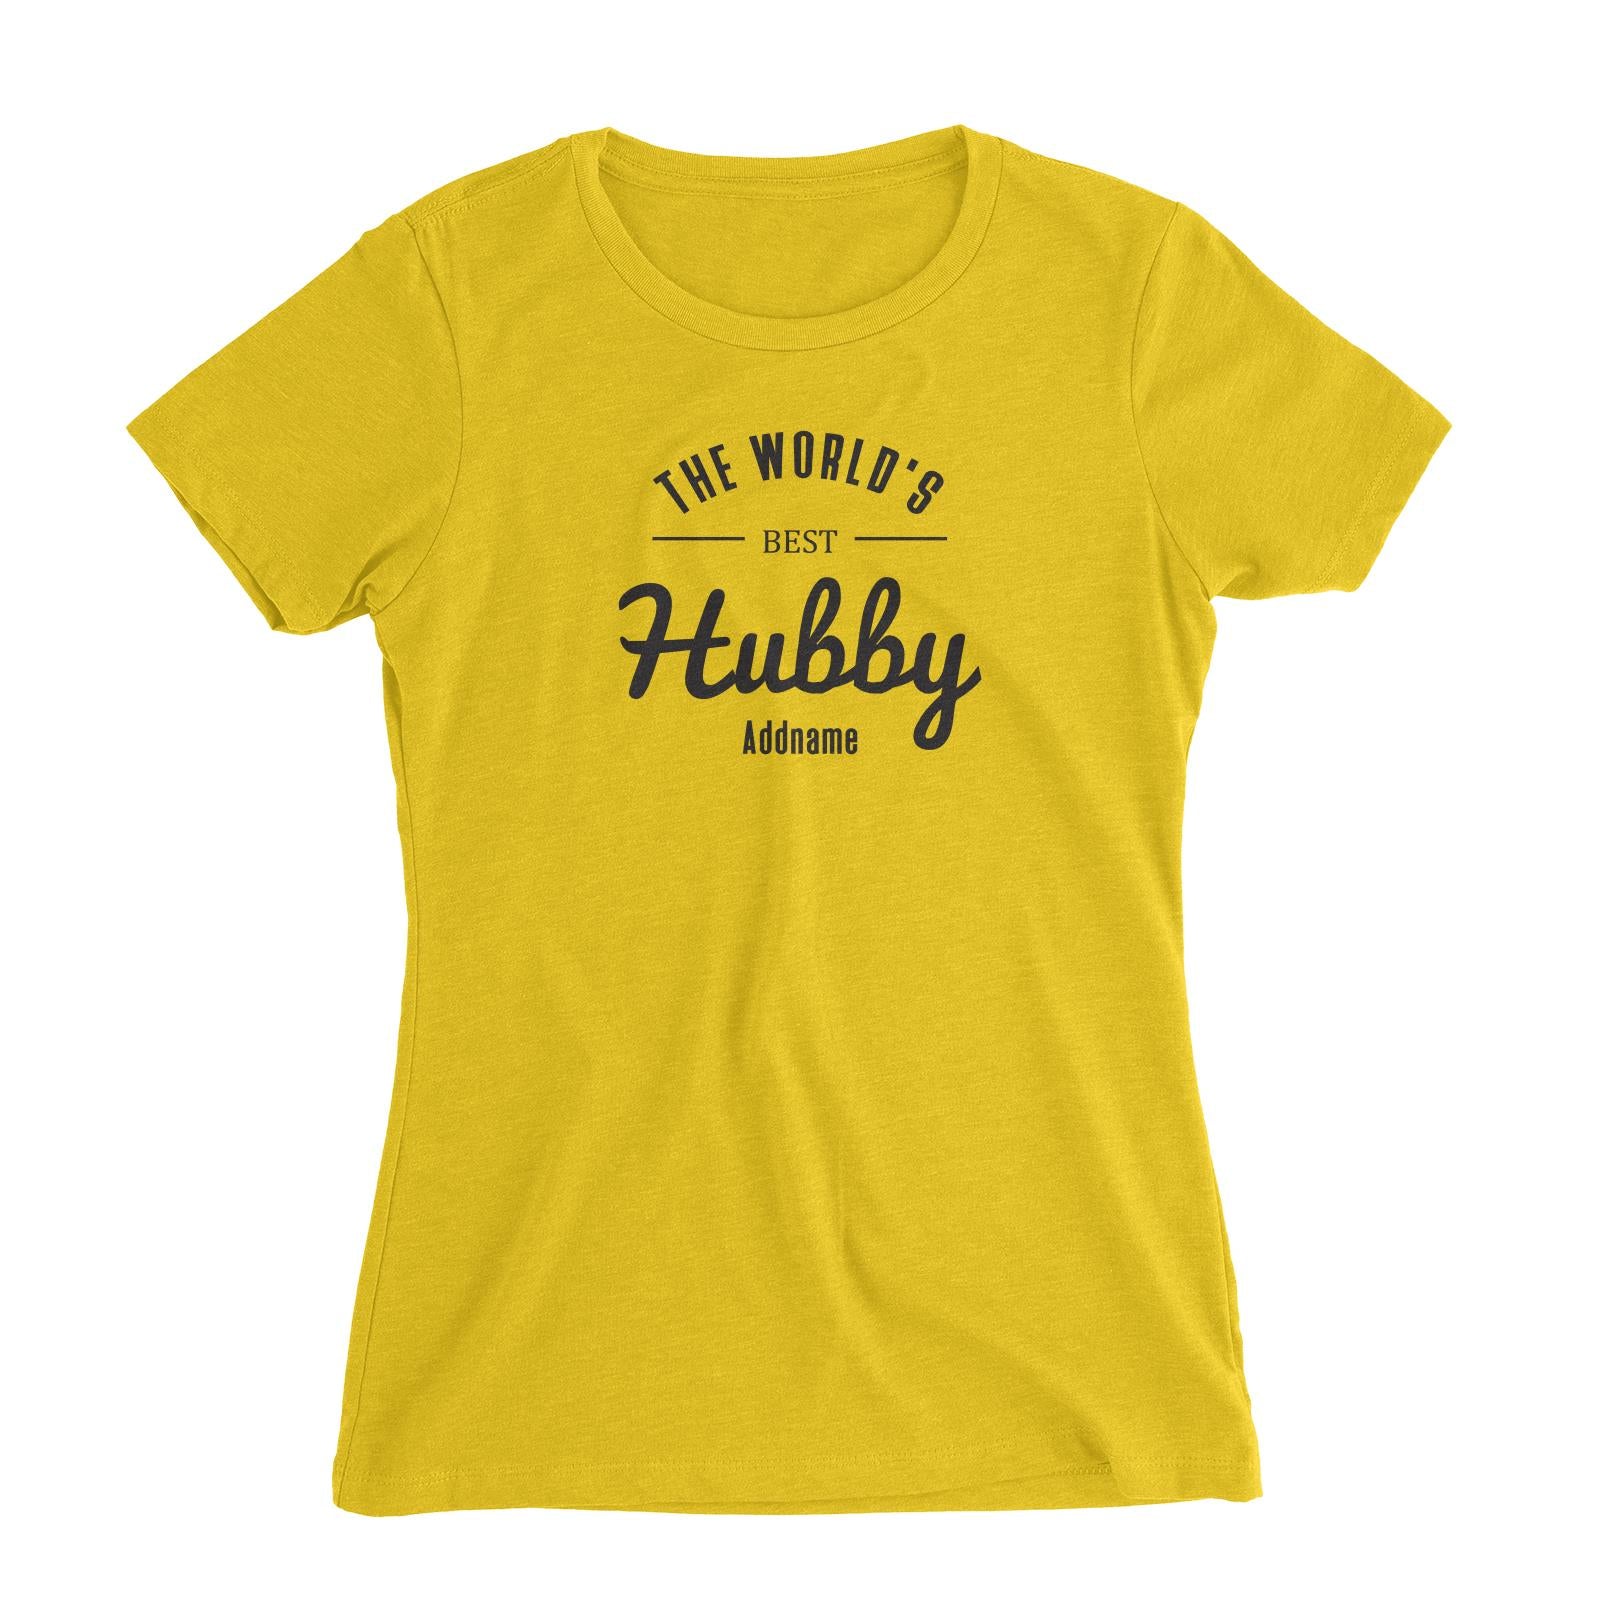 Husband and Wife The World's Best Hubby Addname Women Slim Fit T-Shirt